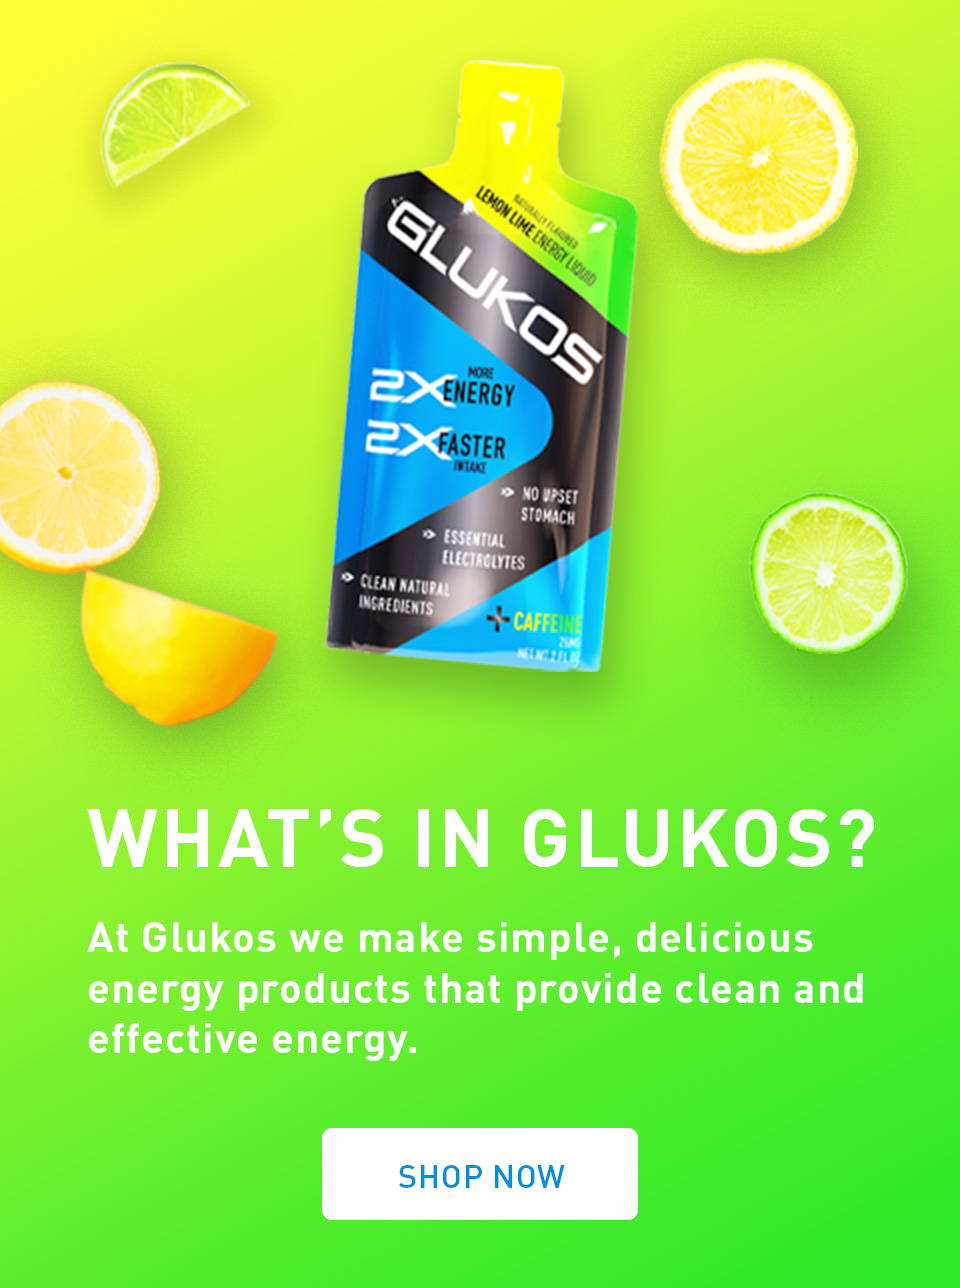 What's in glukos? At Glukos we make simple, delicious energy products that provide clean and effective energy. Shop now.